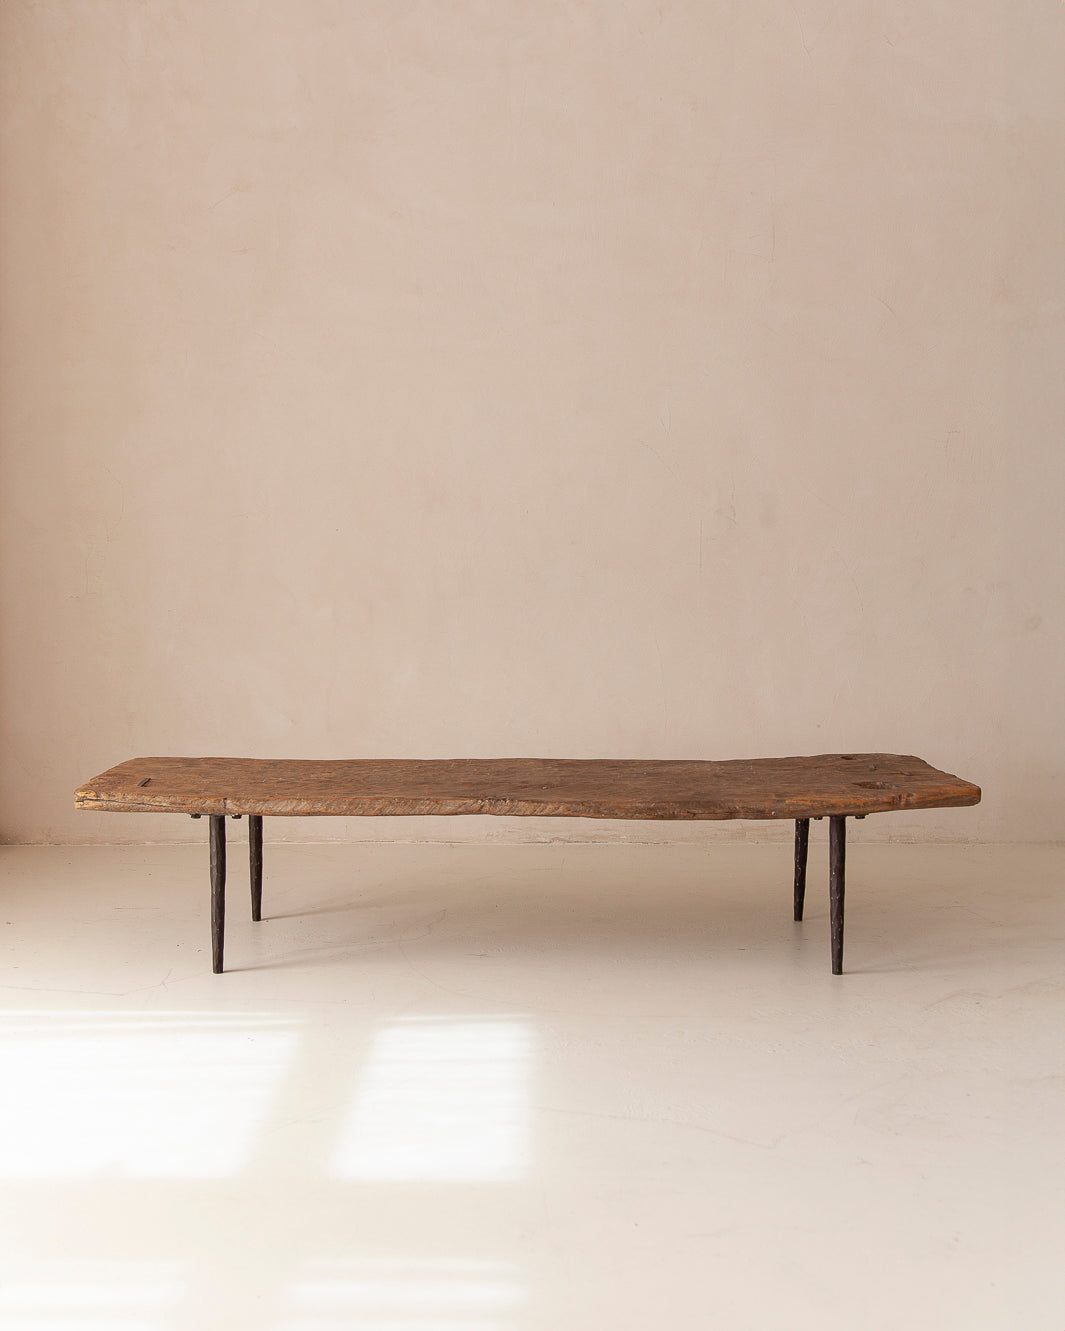 Chinese table from the 30s, 167x58x34cm